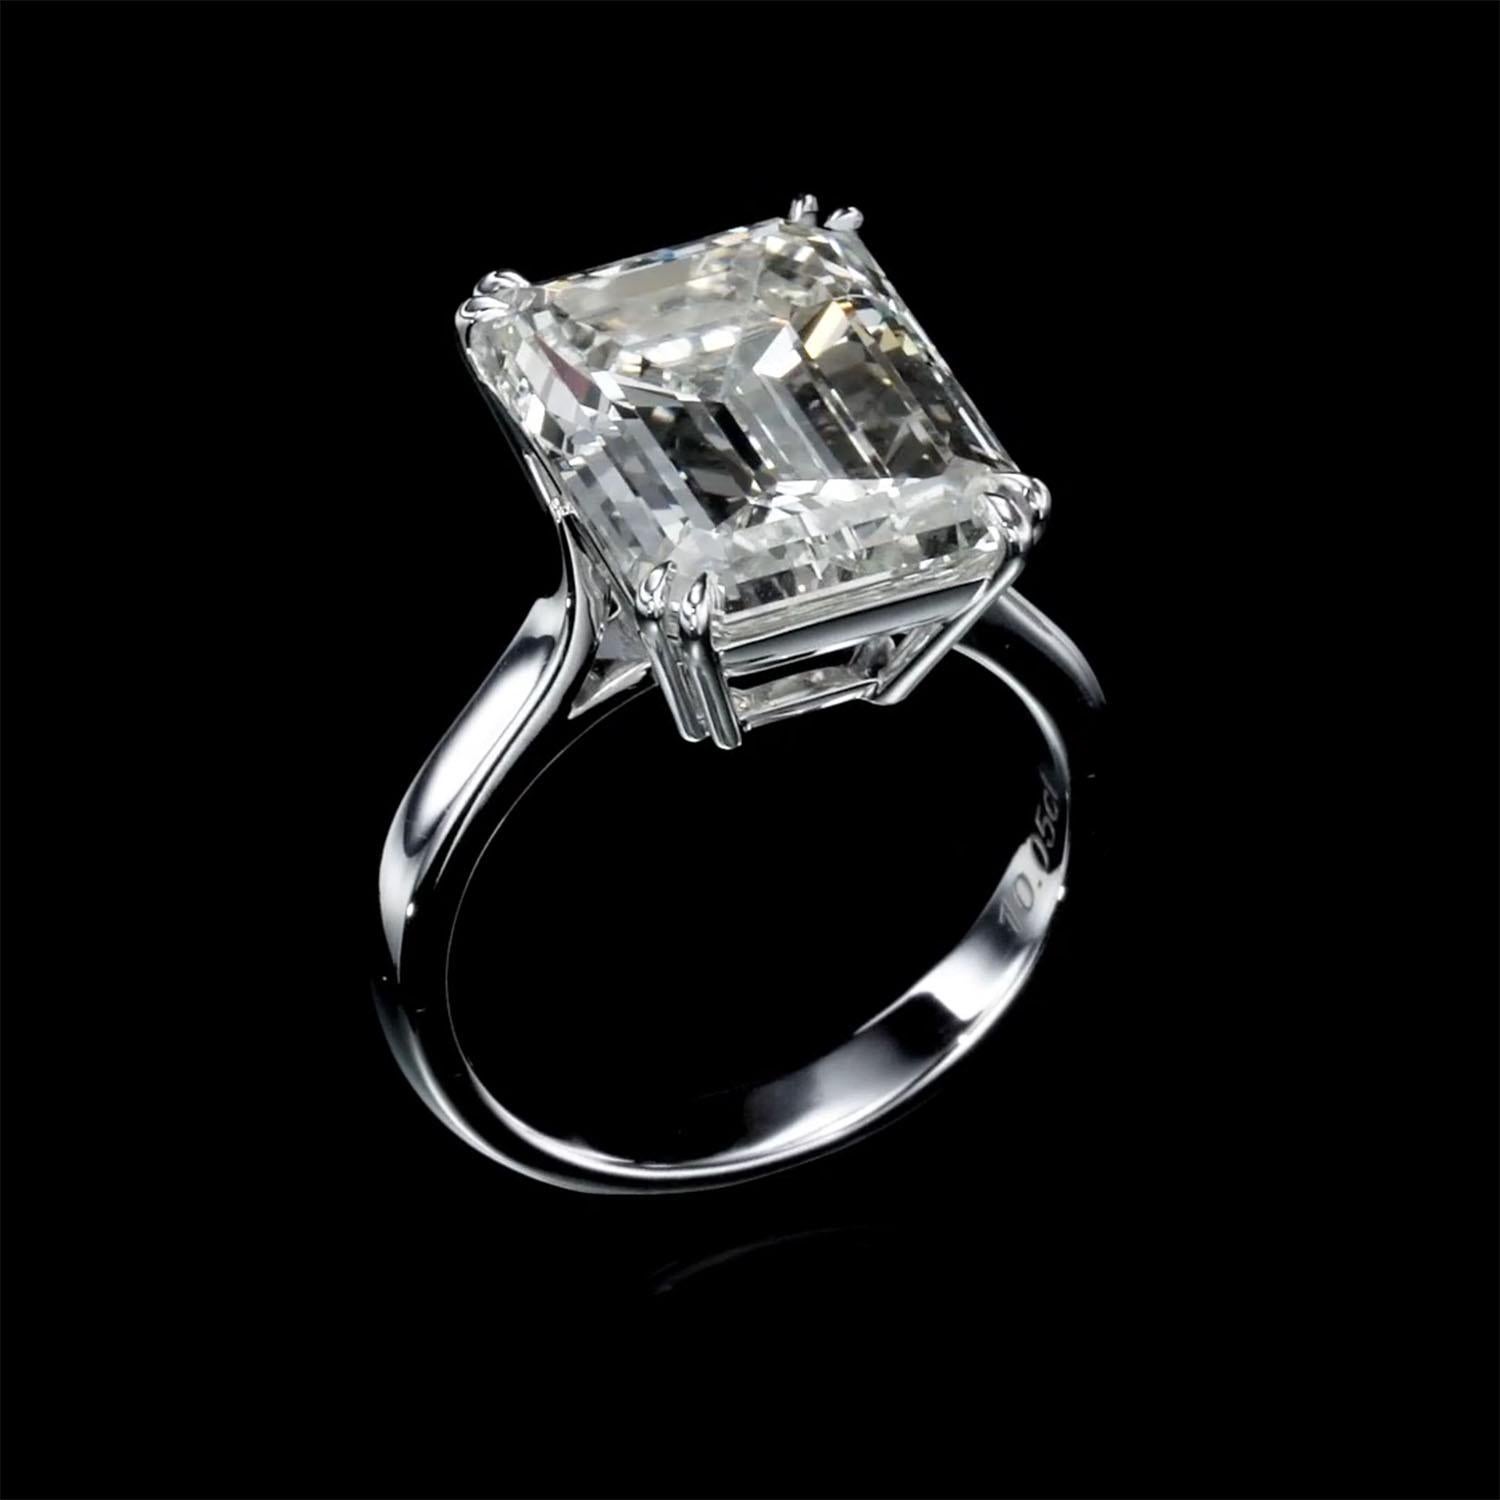 10.05 Carat Natural Diamond Ring Emerald Cut Color L Clarity SI1 For Sale 2